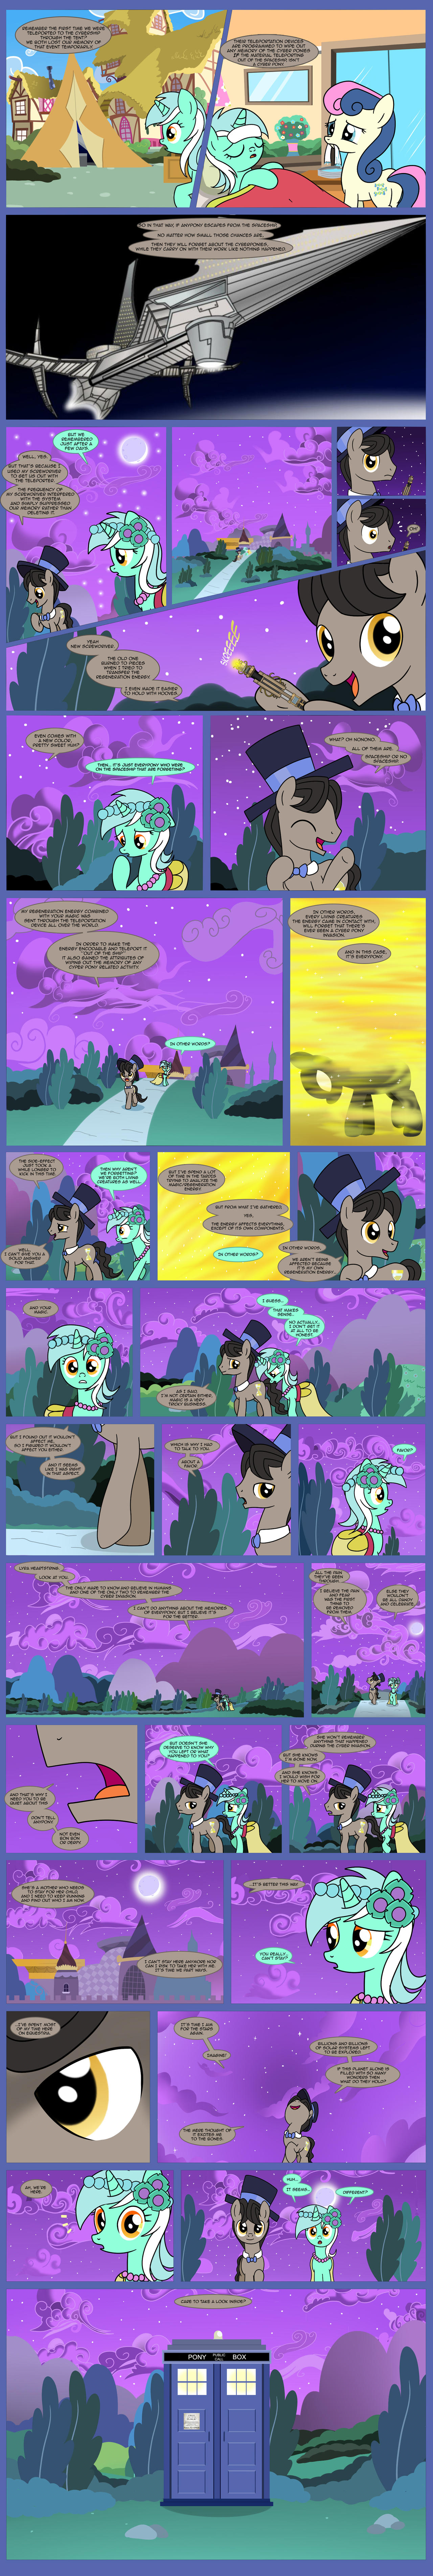 Doctor Whooves - Epilogue Pt 4